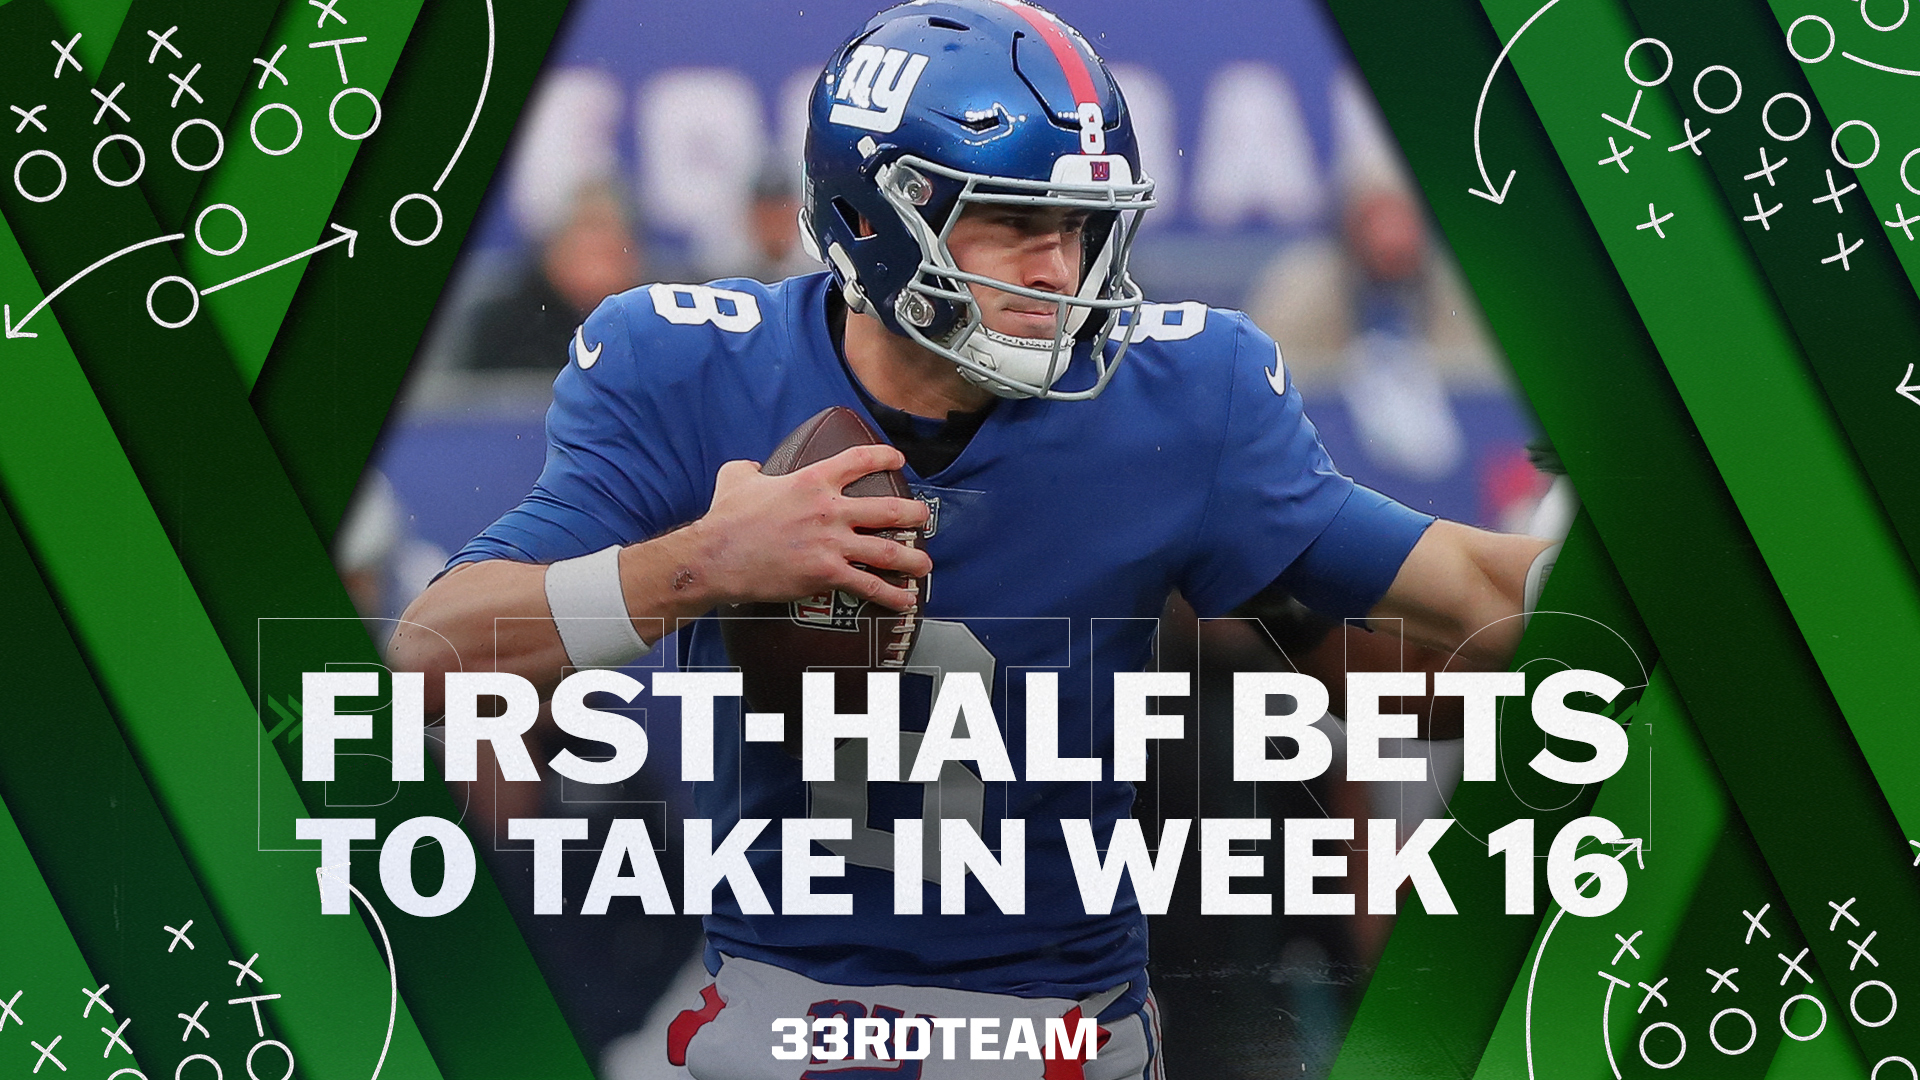 Giants vs. Vikings Featured Among First-Half Bets to Take in Week 16